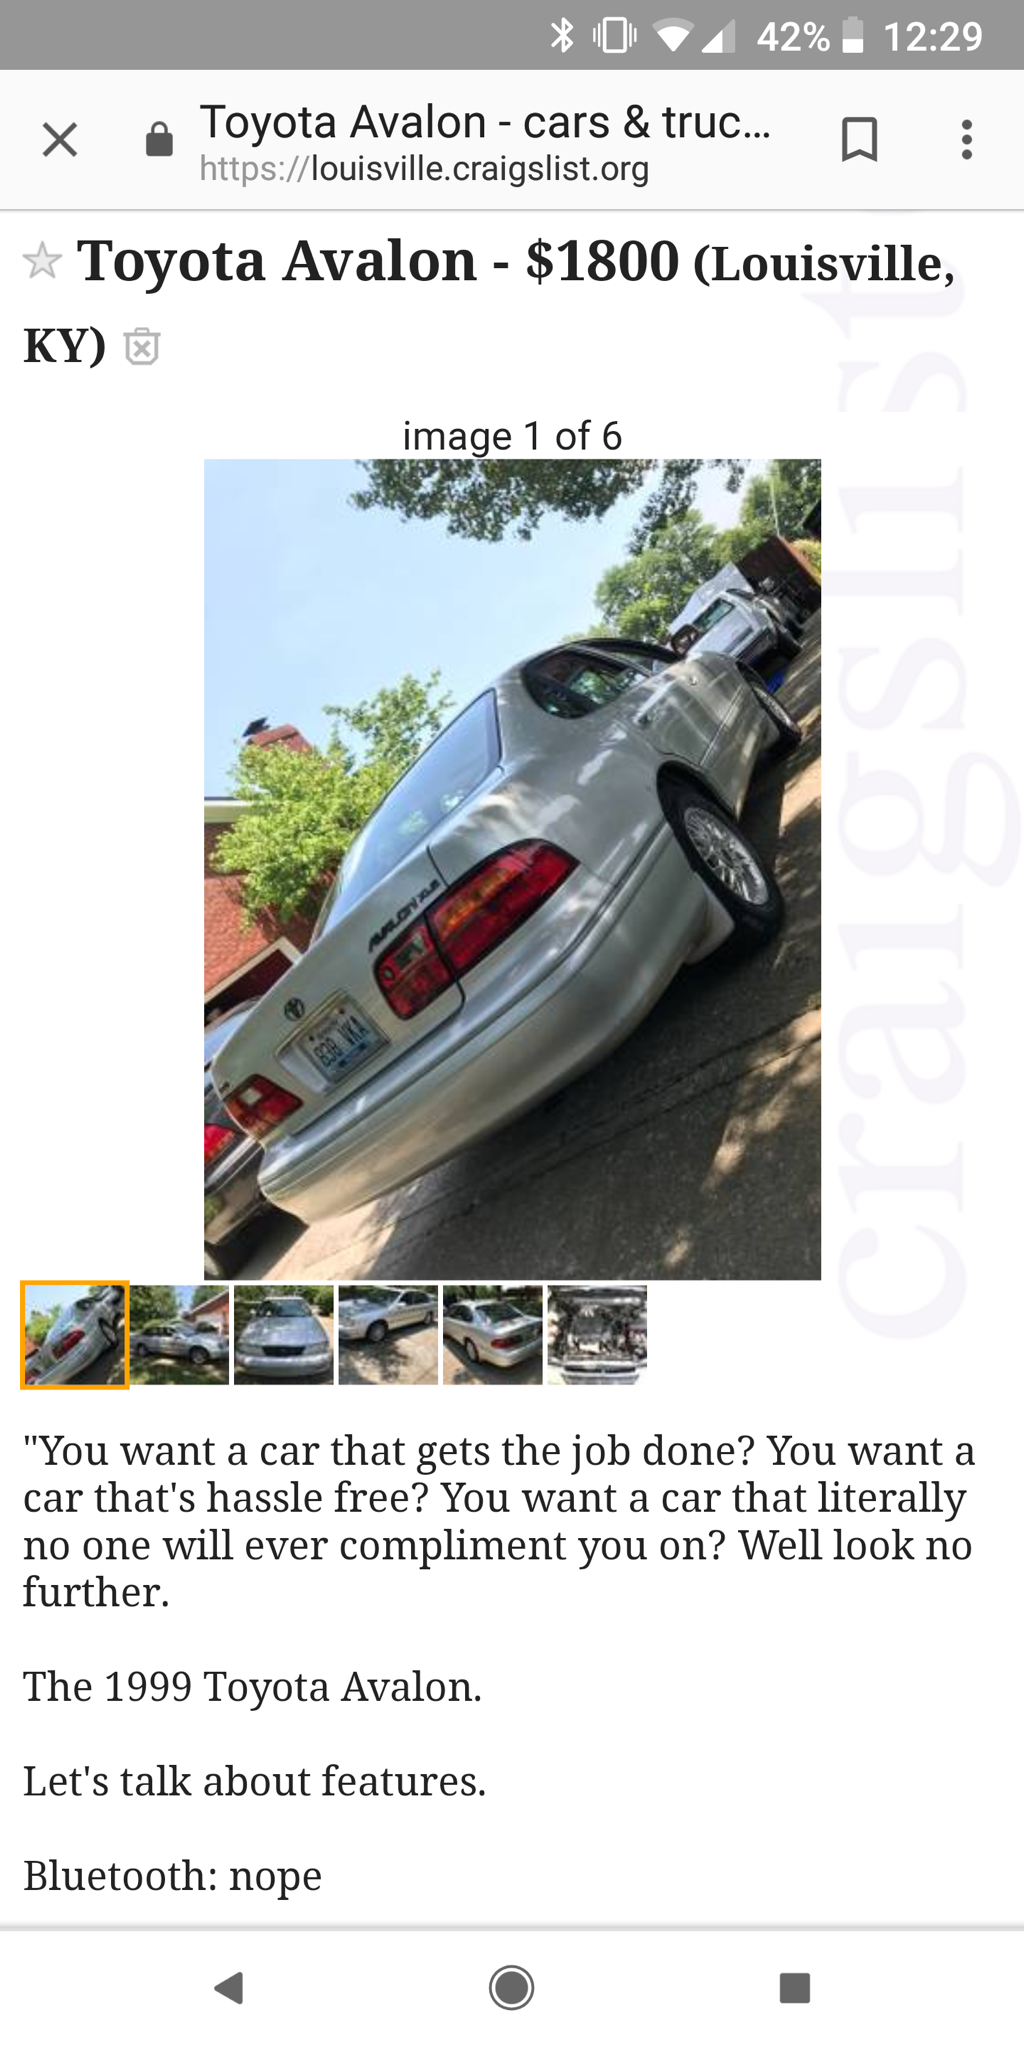 This Craigslist car doesn’t care what you want, it knows what you need.